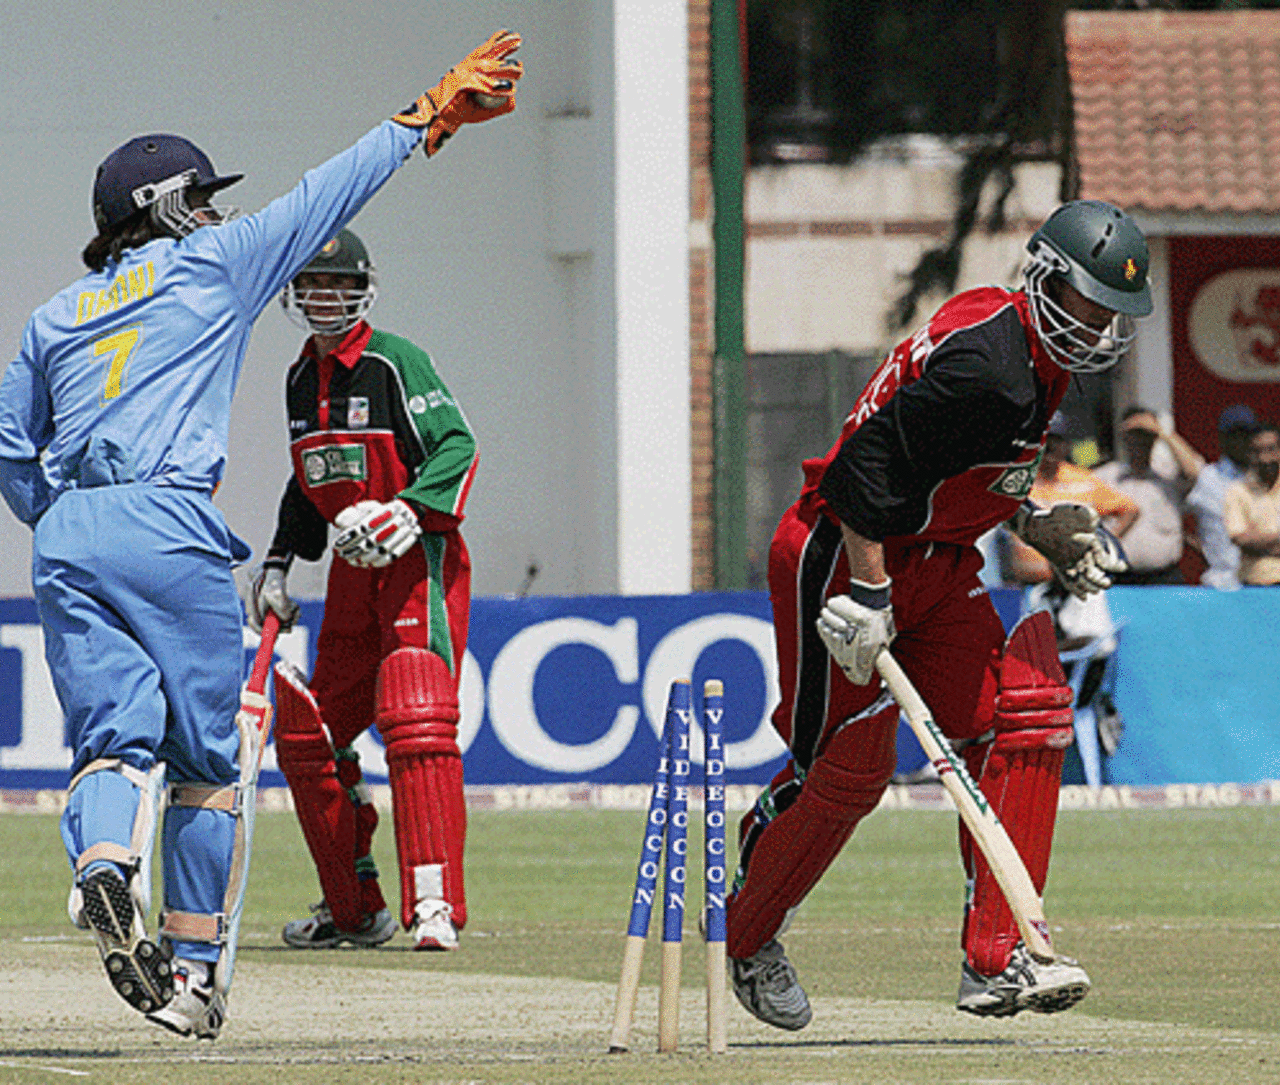 MS Dhoni stumps Andy Blignaut after he hit 41 off 26 balls, Zimbabwe v India, Harare, September 4, 2005